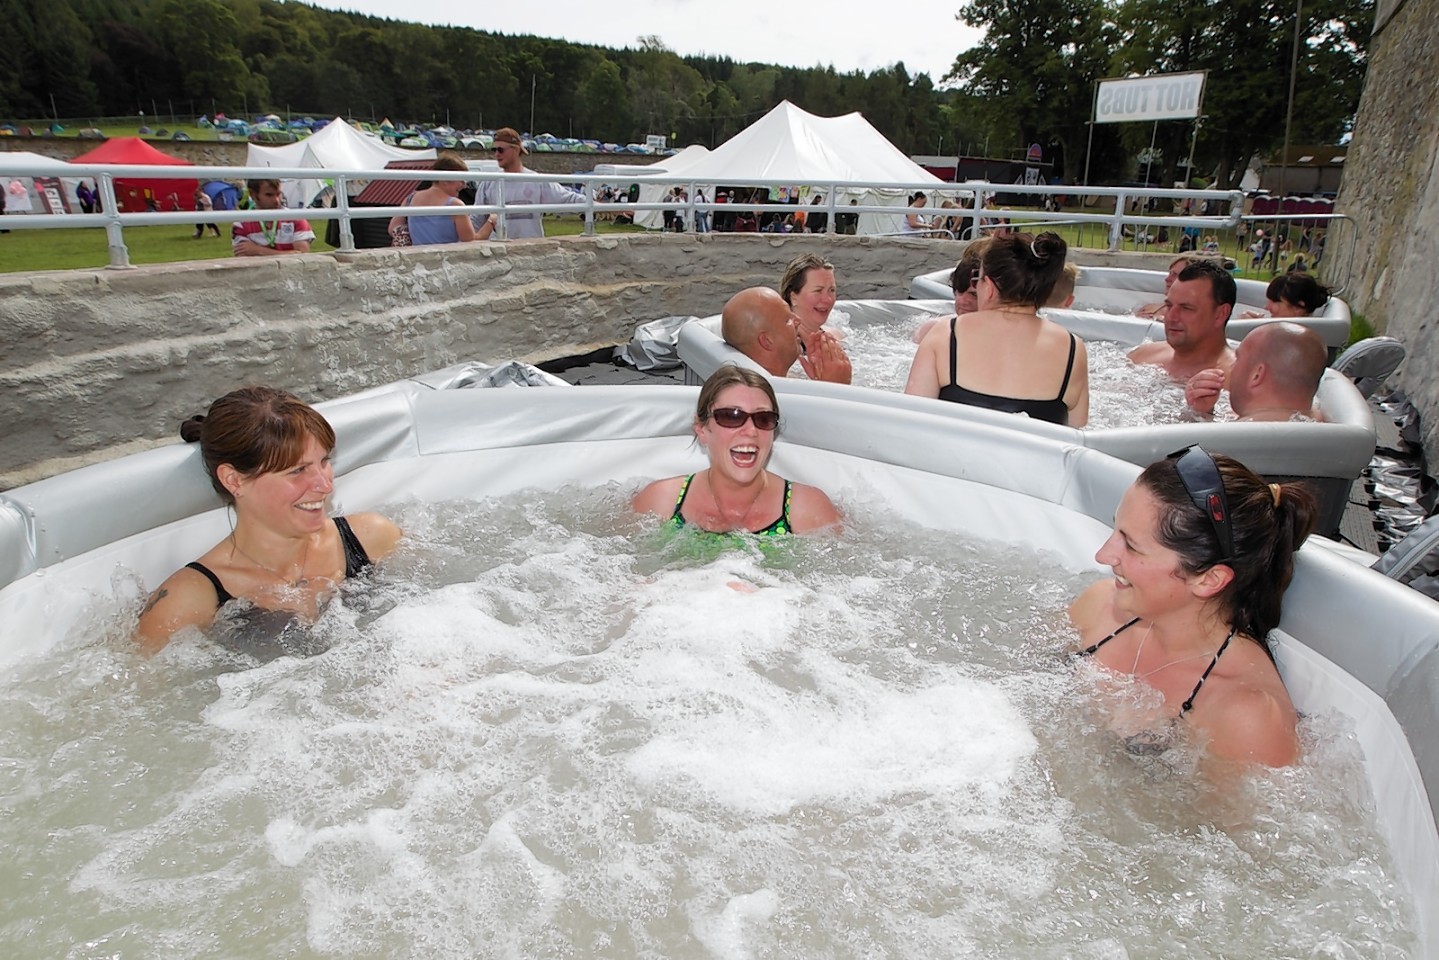 The hot tub was a star attraction at the Belladrum Festival which was hailed a success